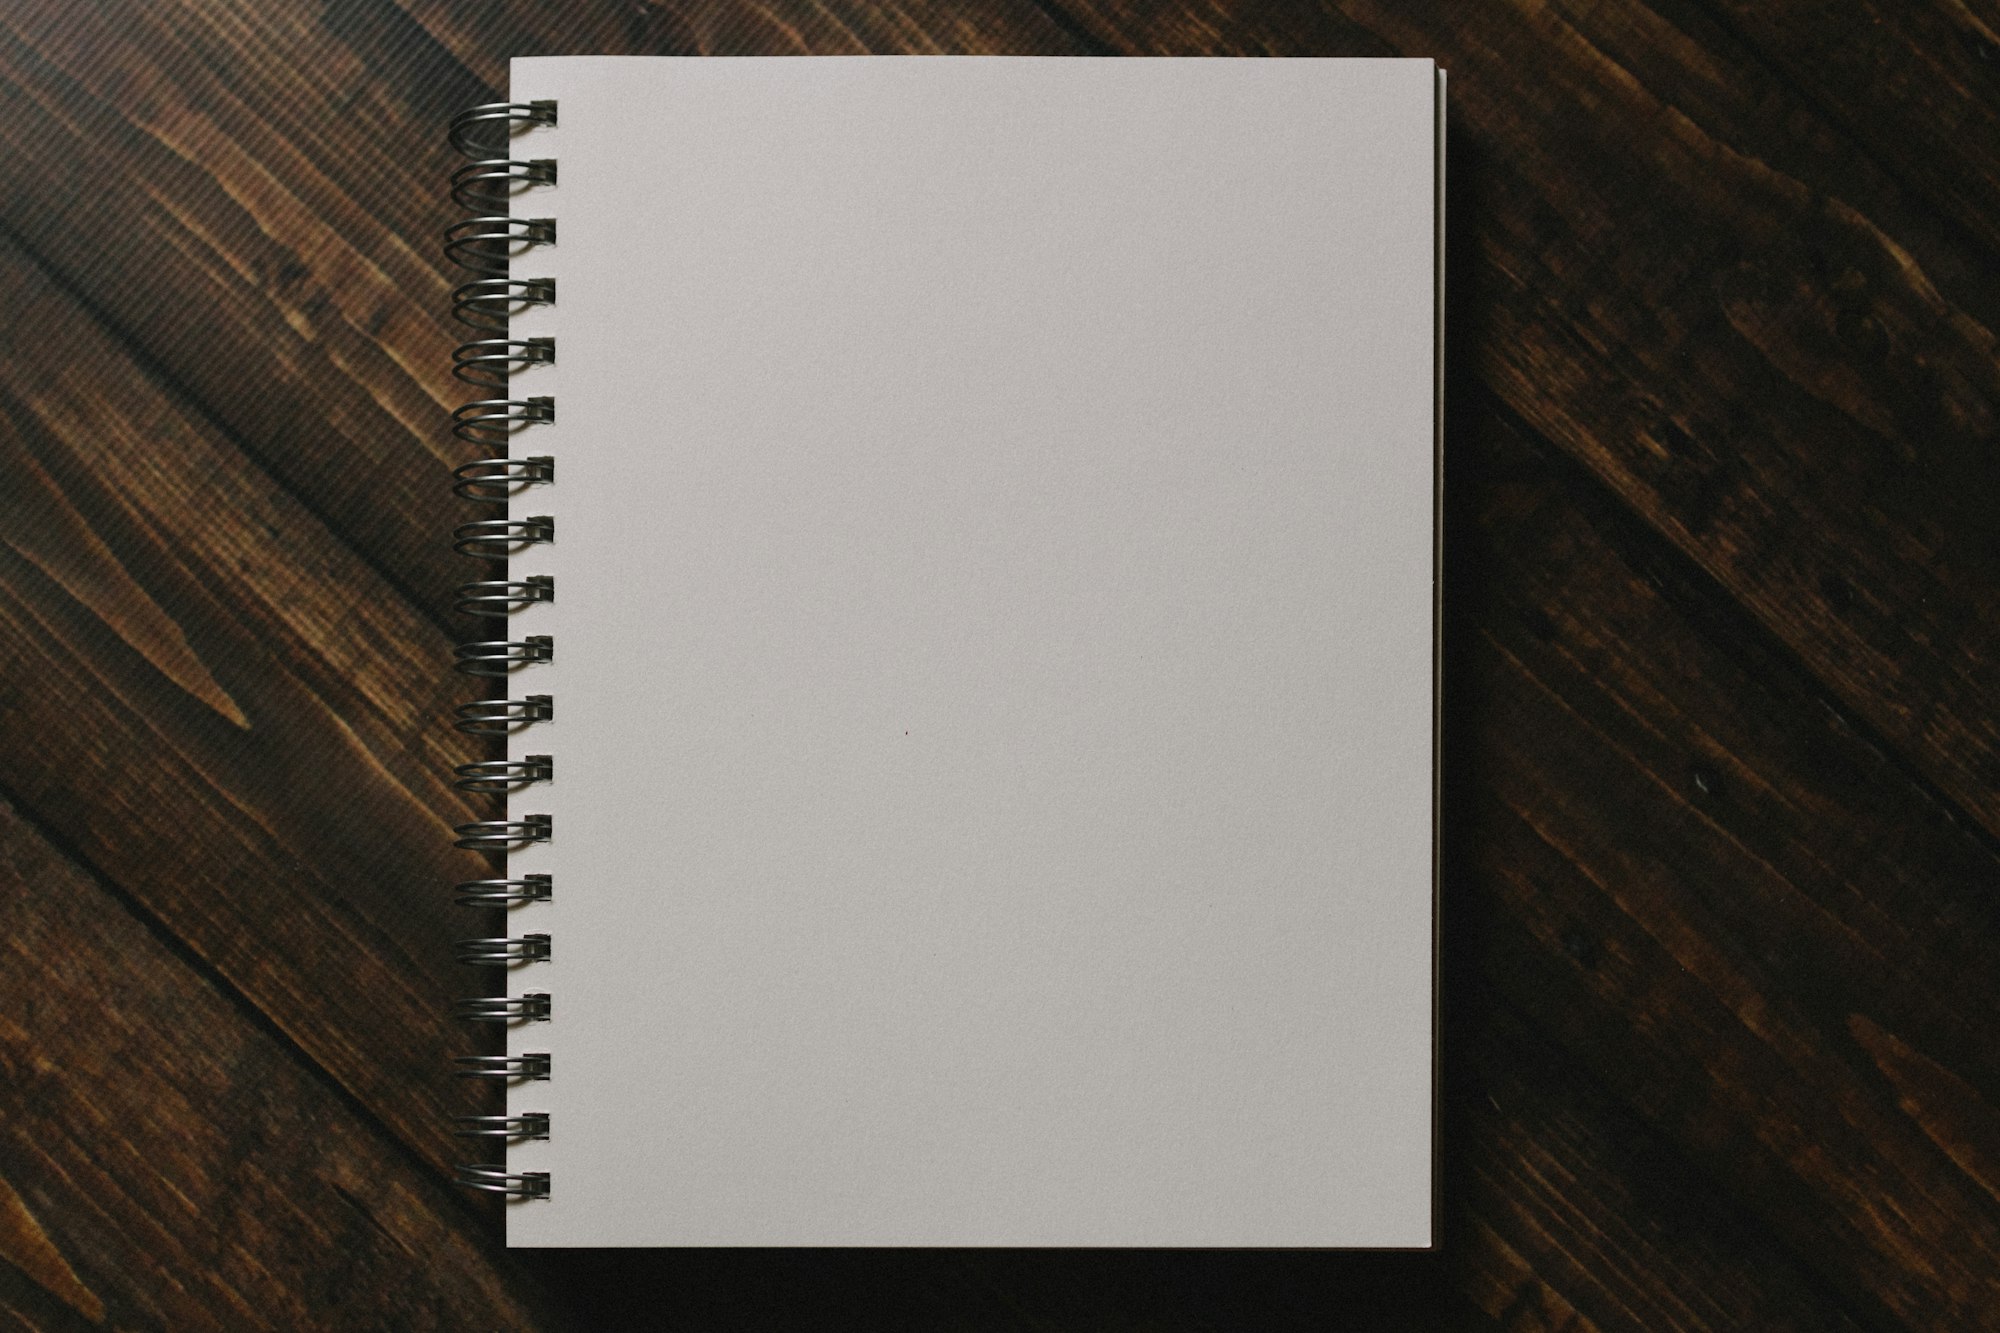 The list in front of every notebook